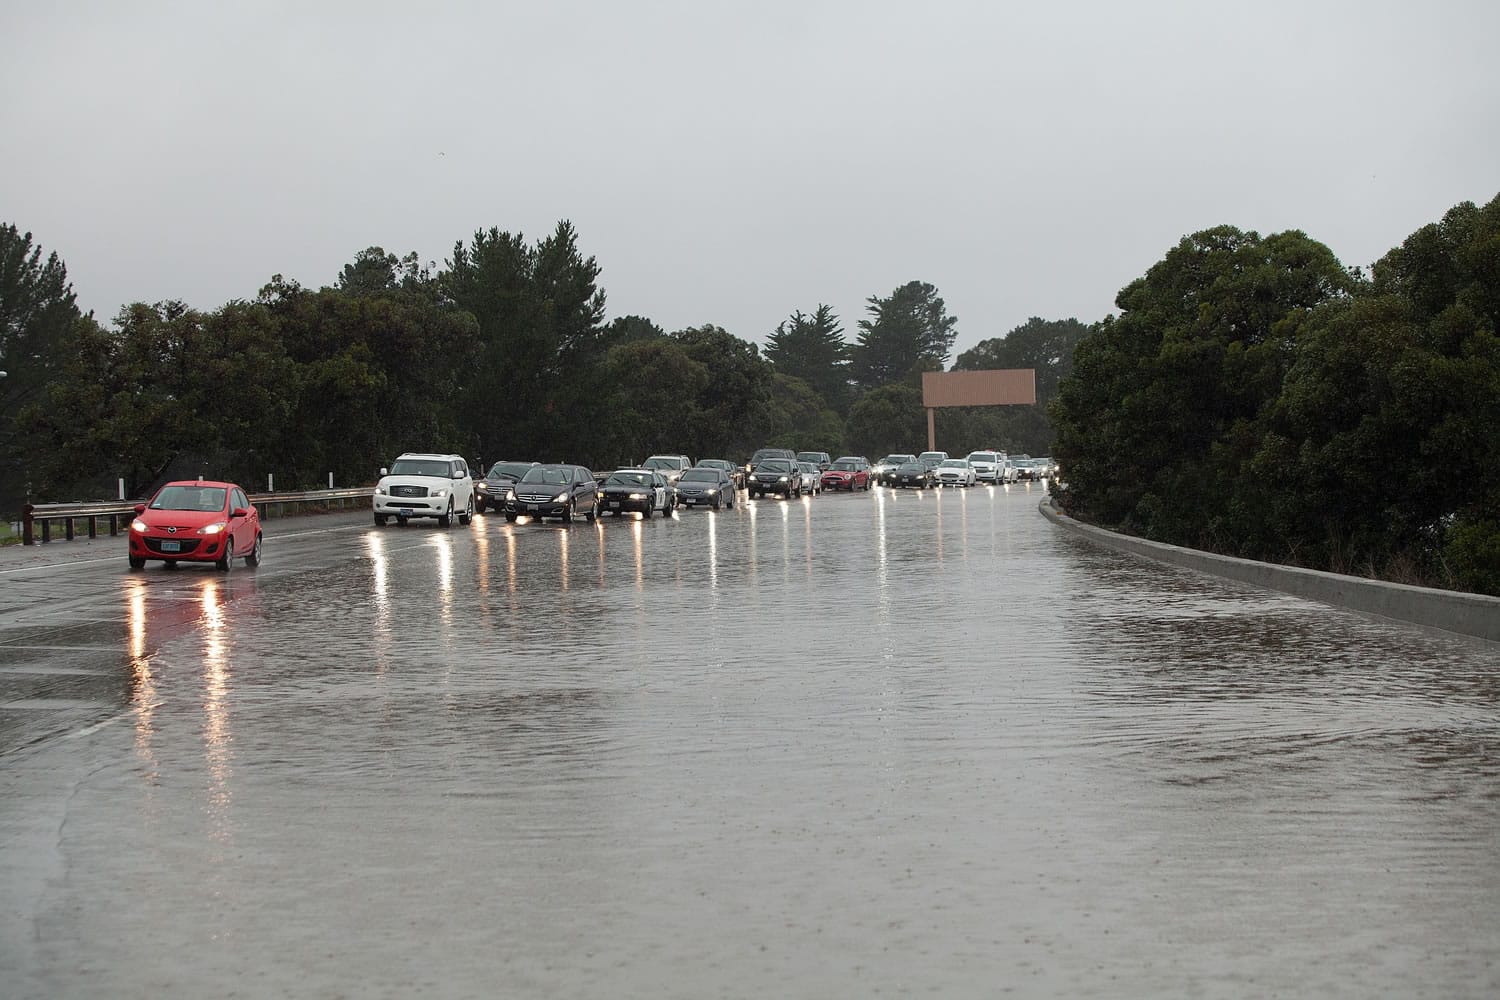 Cars make their way past flooding as they head south on the 280 freeway through Daly City, Calif. on Thursday, Dec. 11, 2014, as a powerful storm churned through the San Francisco Bay Area on Thursday, knocking out power to tens of thousands and delaying commuters while bringing a soaking of much needed rain.